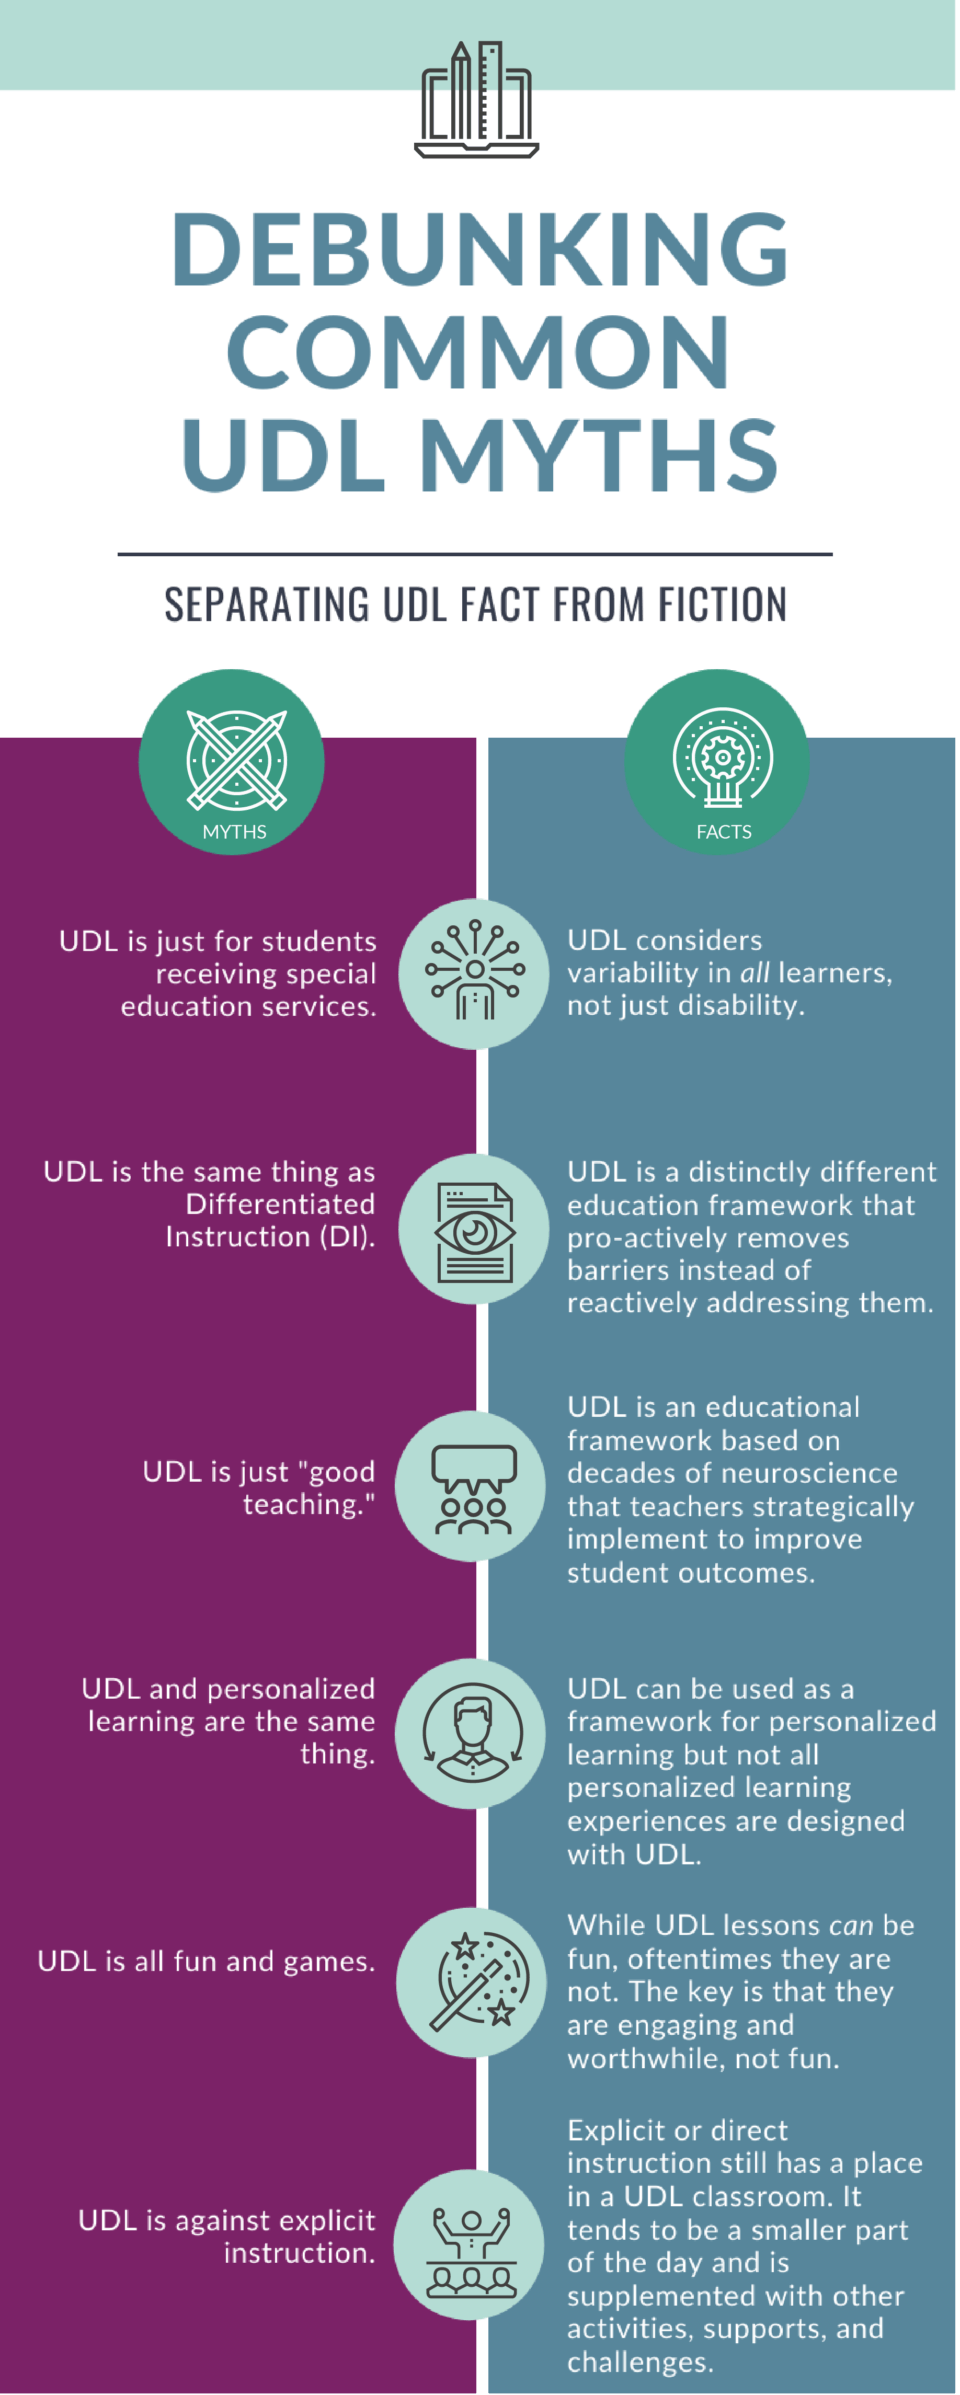 Debunking Common Myths About UDL